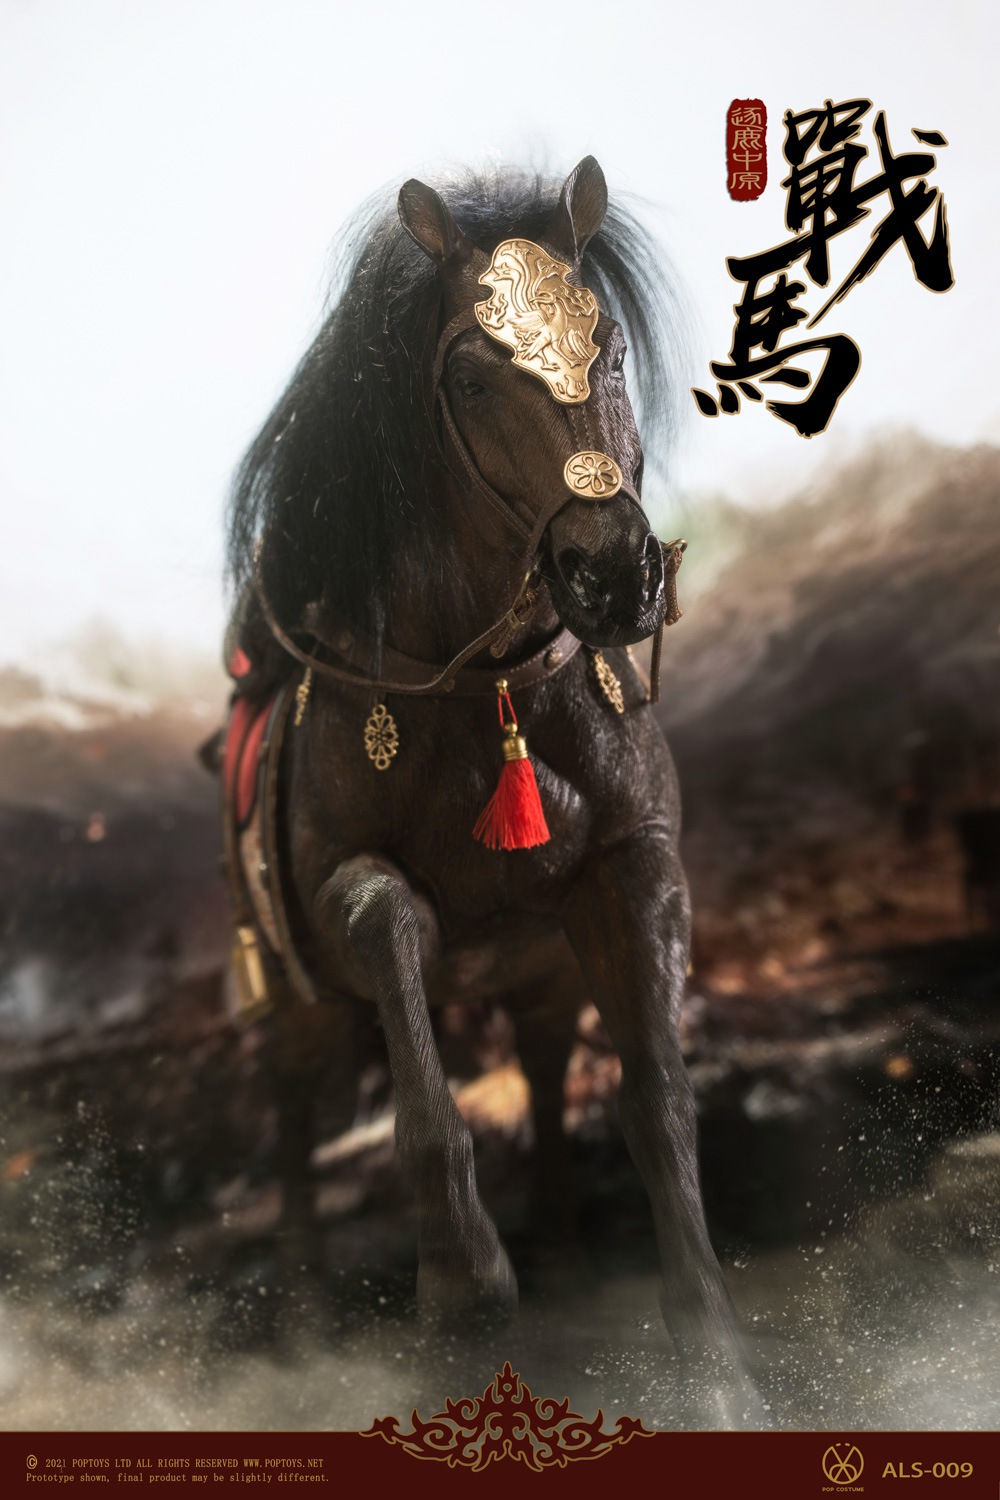 ArmoredLegendSeries - NEW PRODUCT: PopToys: 1/6 Armored Legend Series Competing in the Central Plains-Qingqi Pioneer & War Horse [100% Steel Plate Rivet Armor/Pure Copper Accessories] 19012810